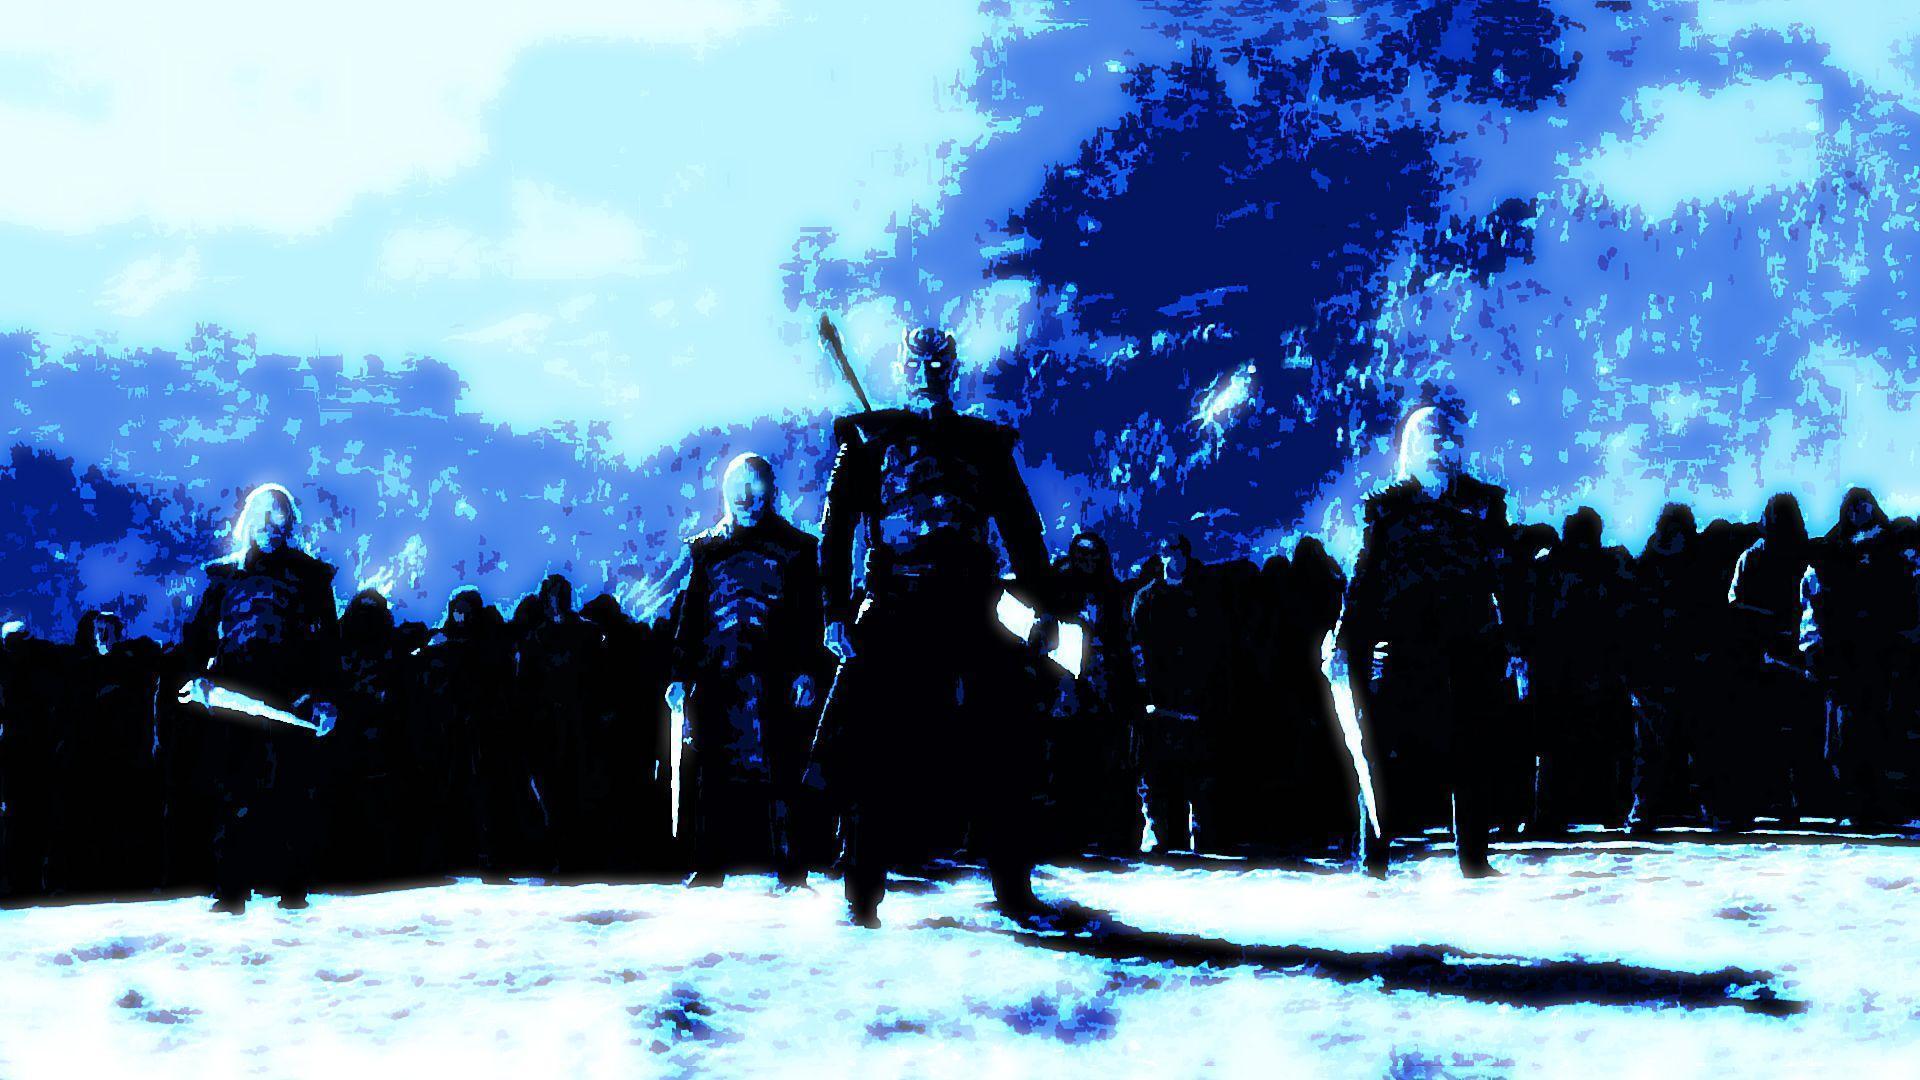 Game of Thrones Night's King' Army